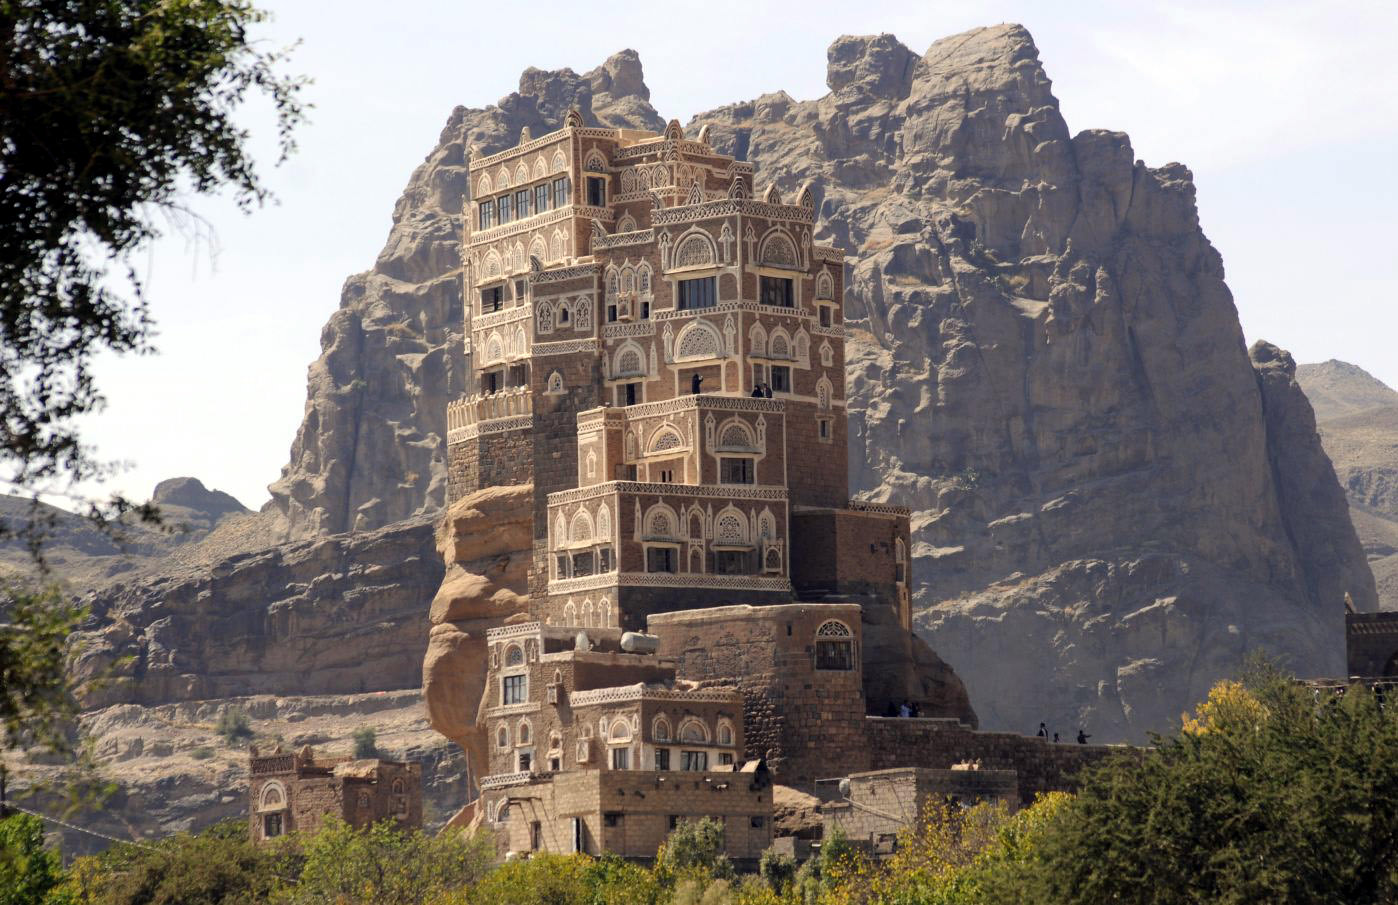 The Most Beautiful Places in Yemen